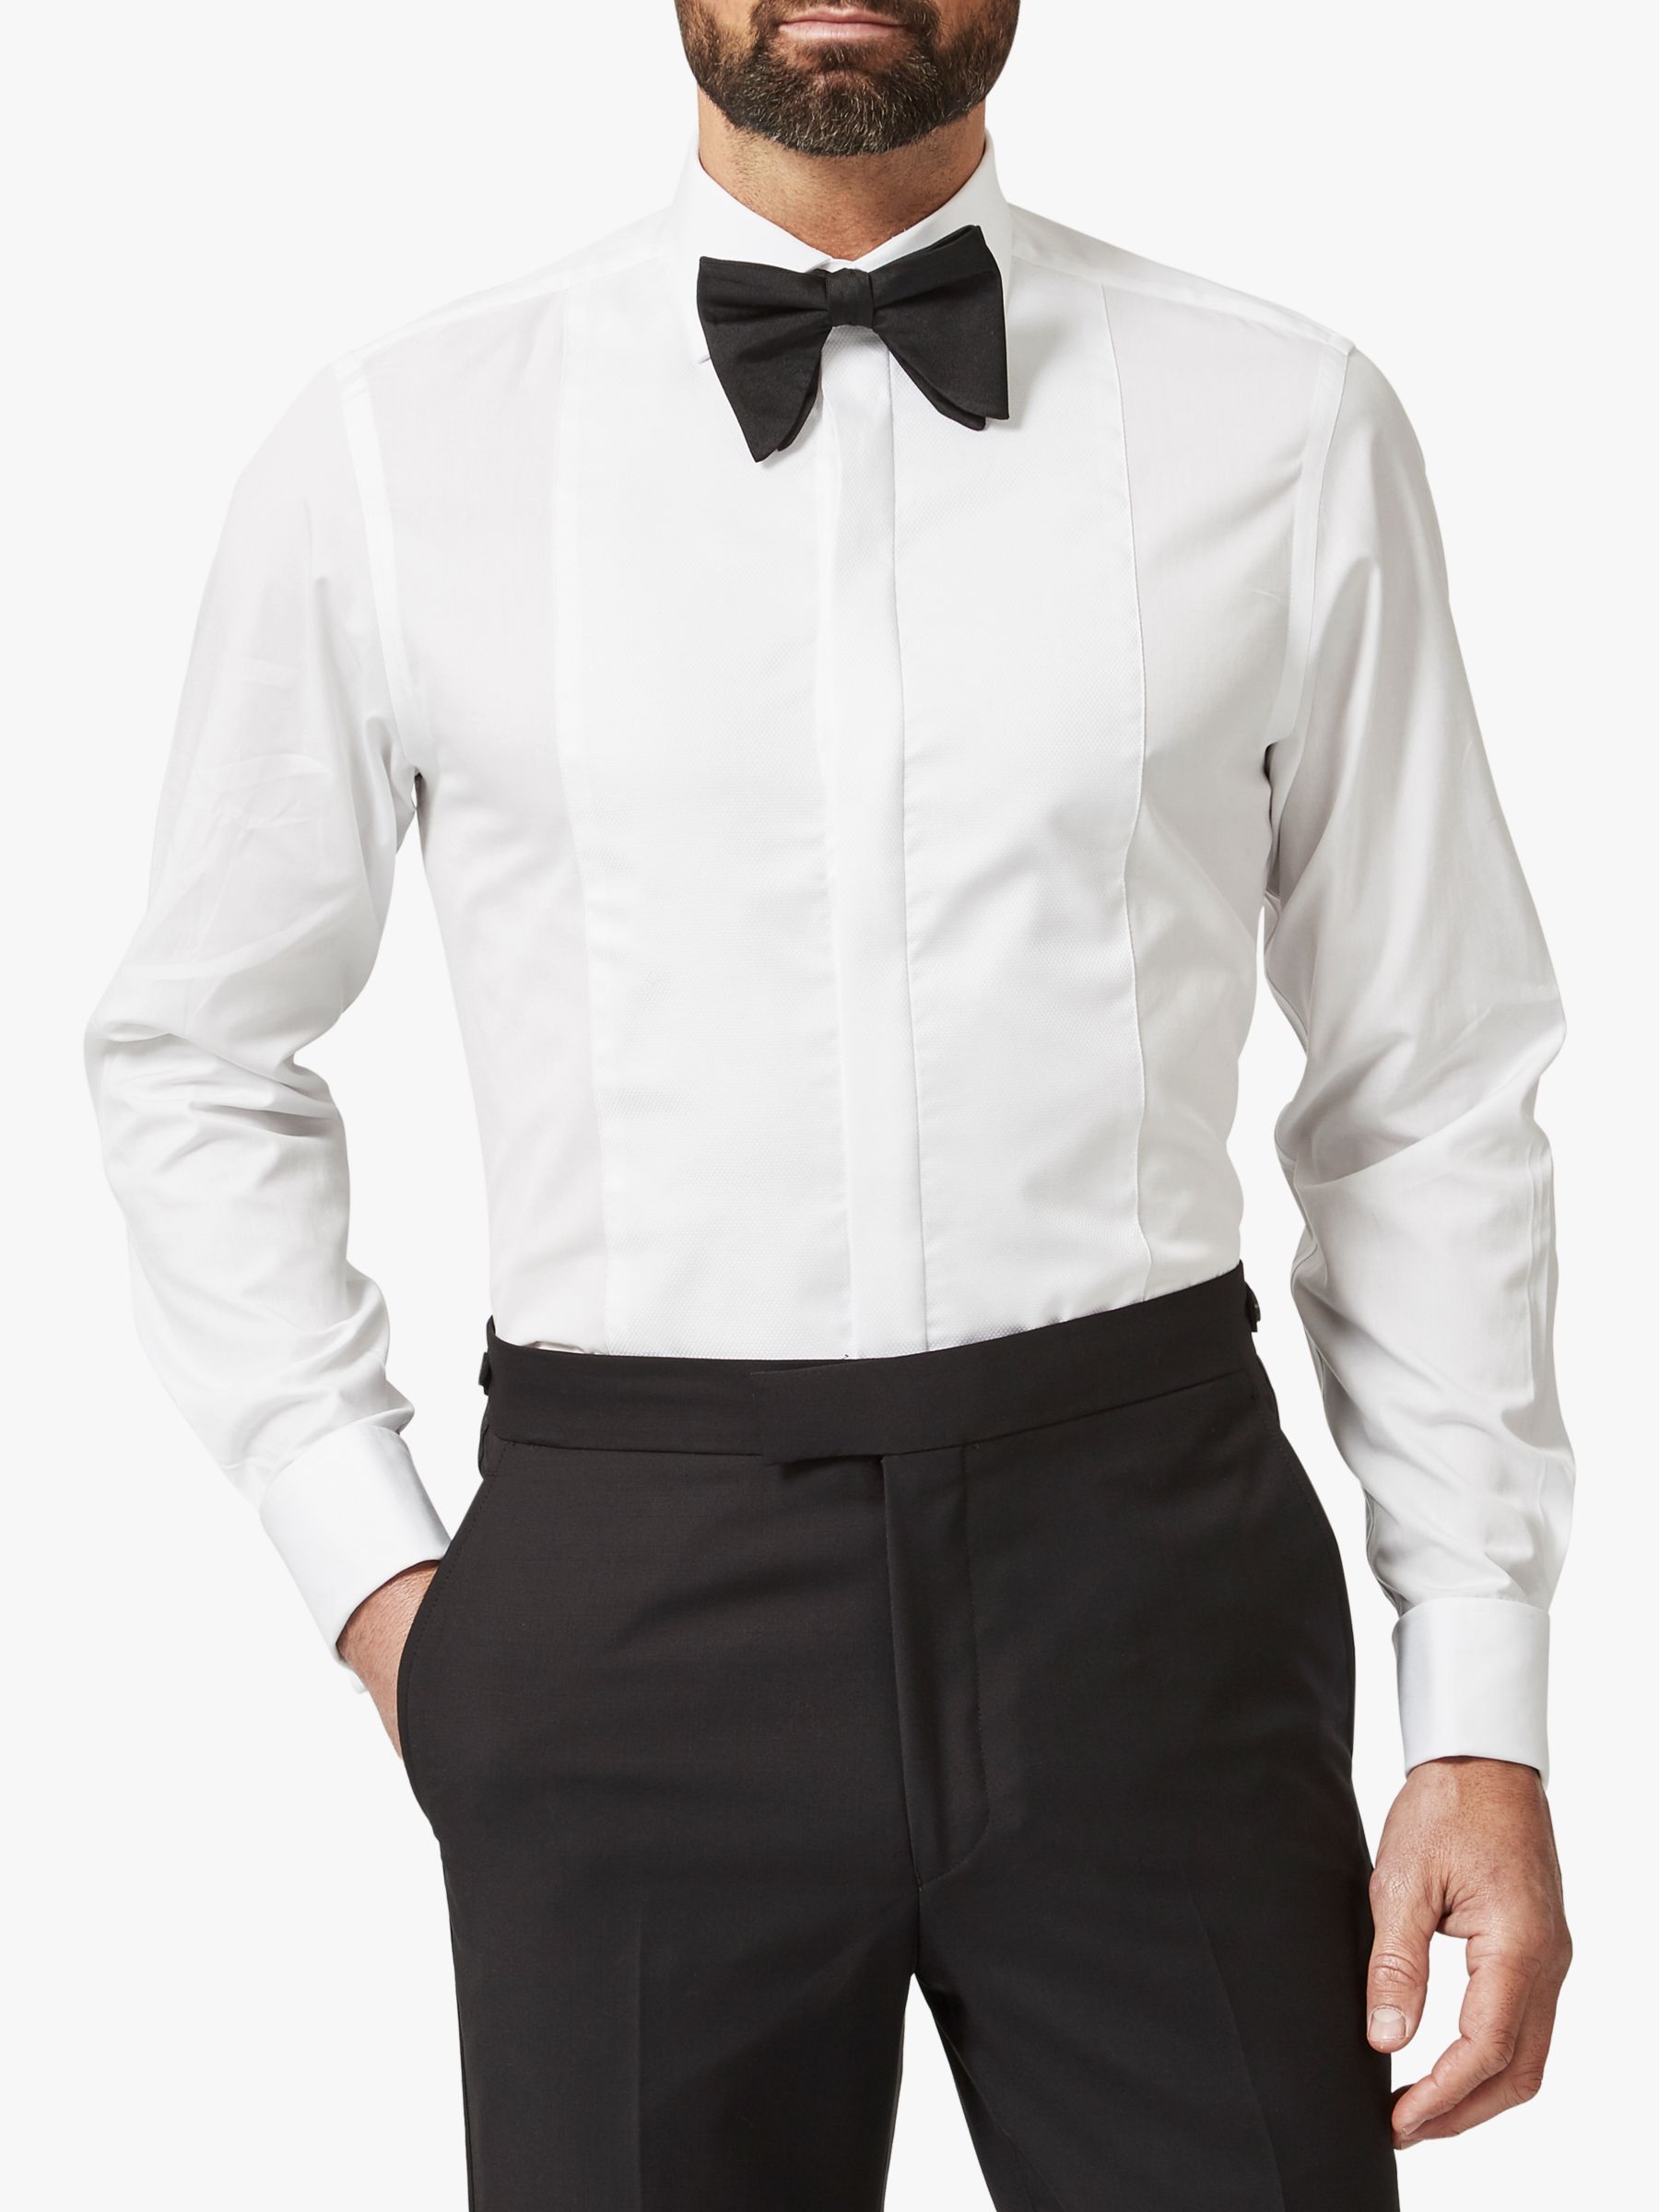 Chester by Chester Barrie Tailored Dress Shirt, White at John Lewis ...